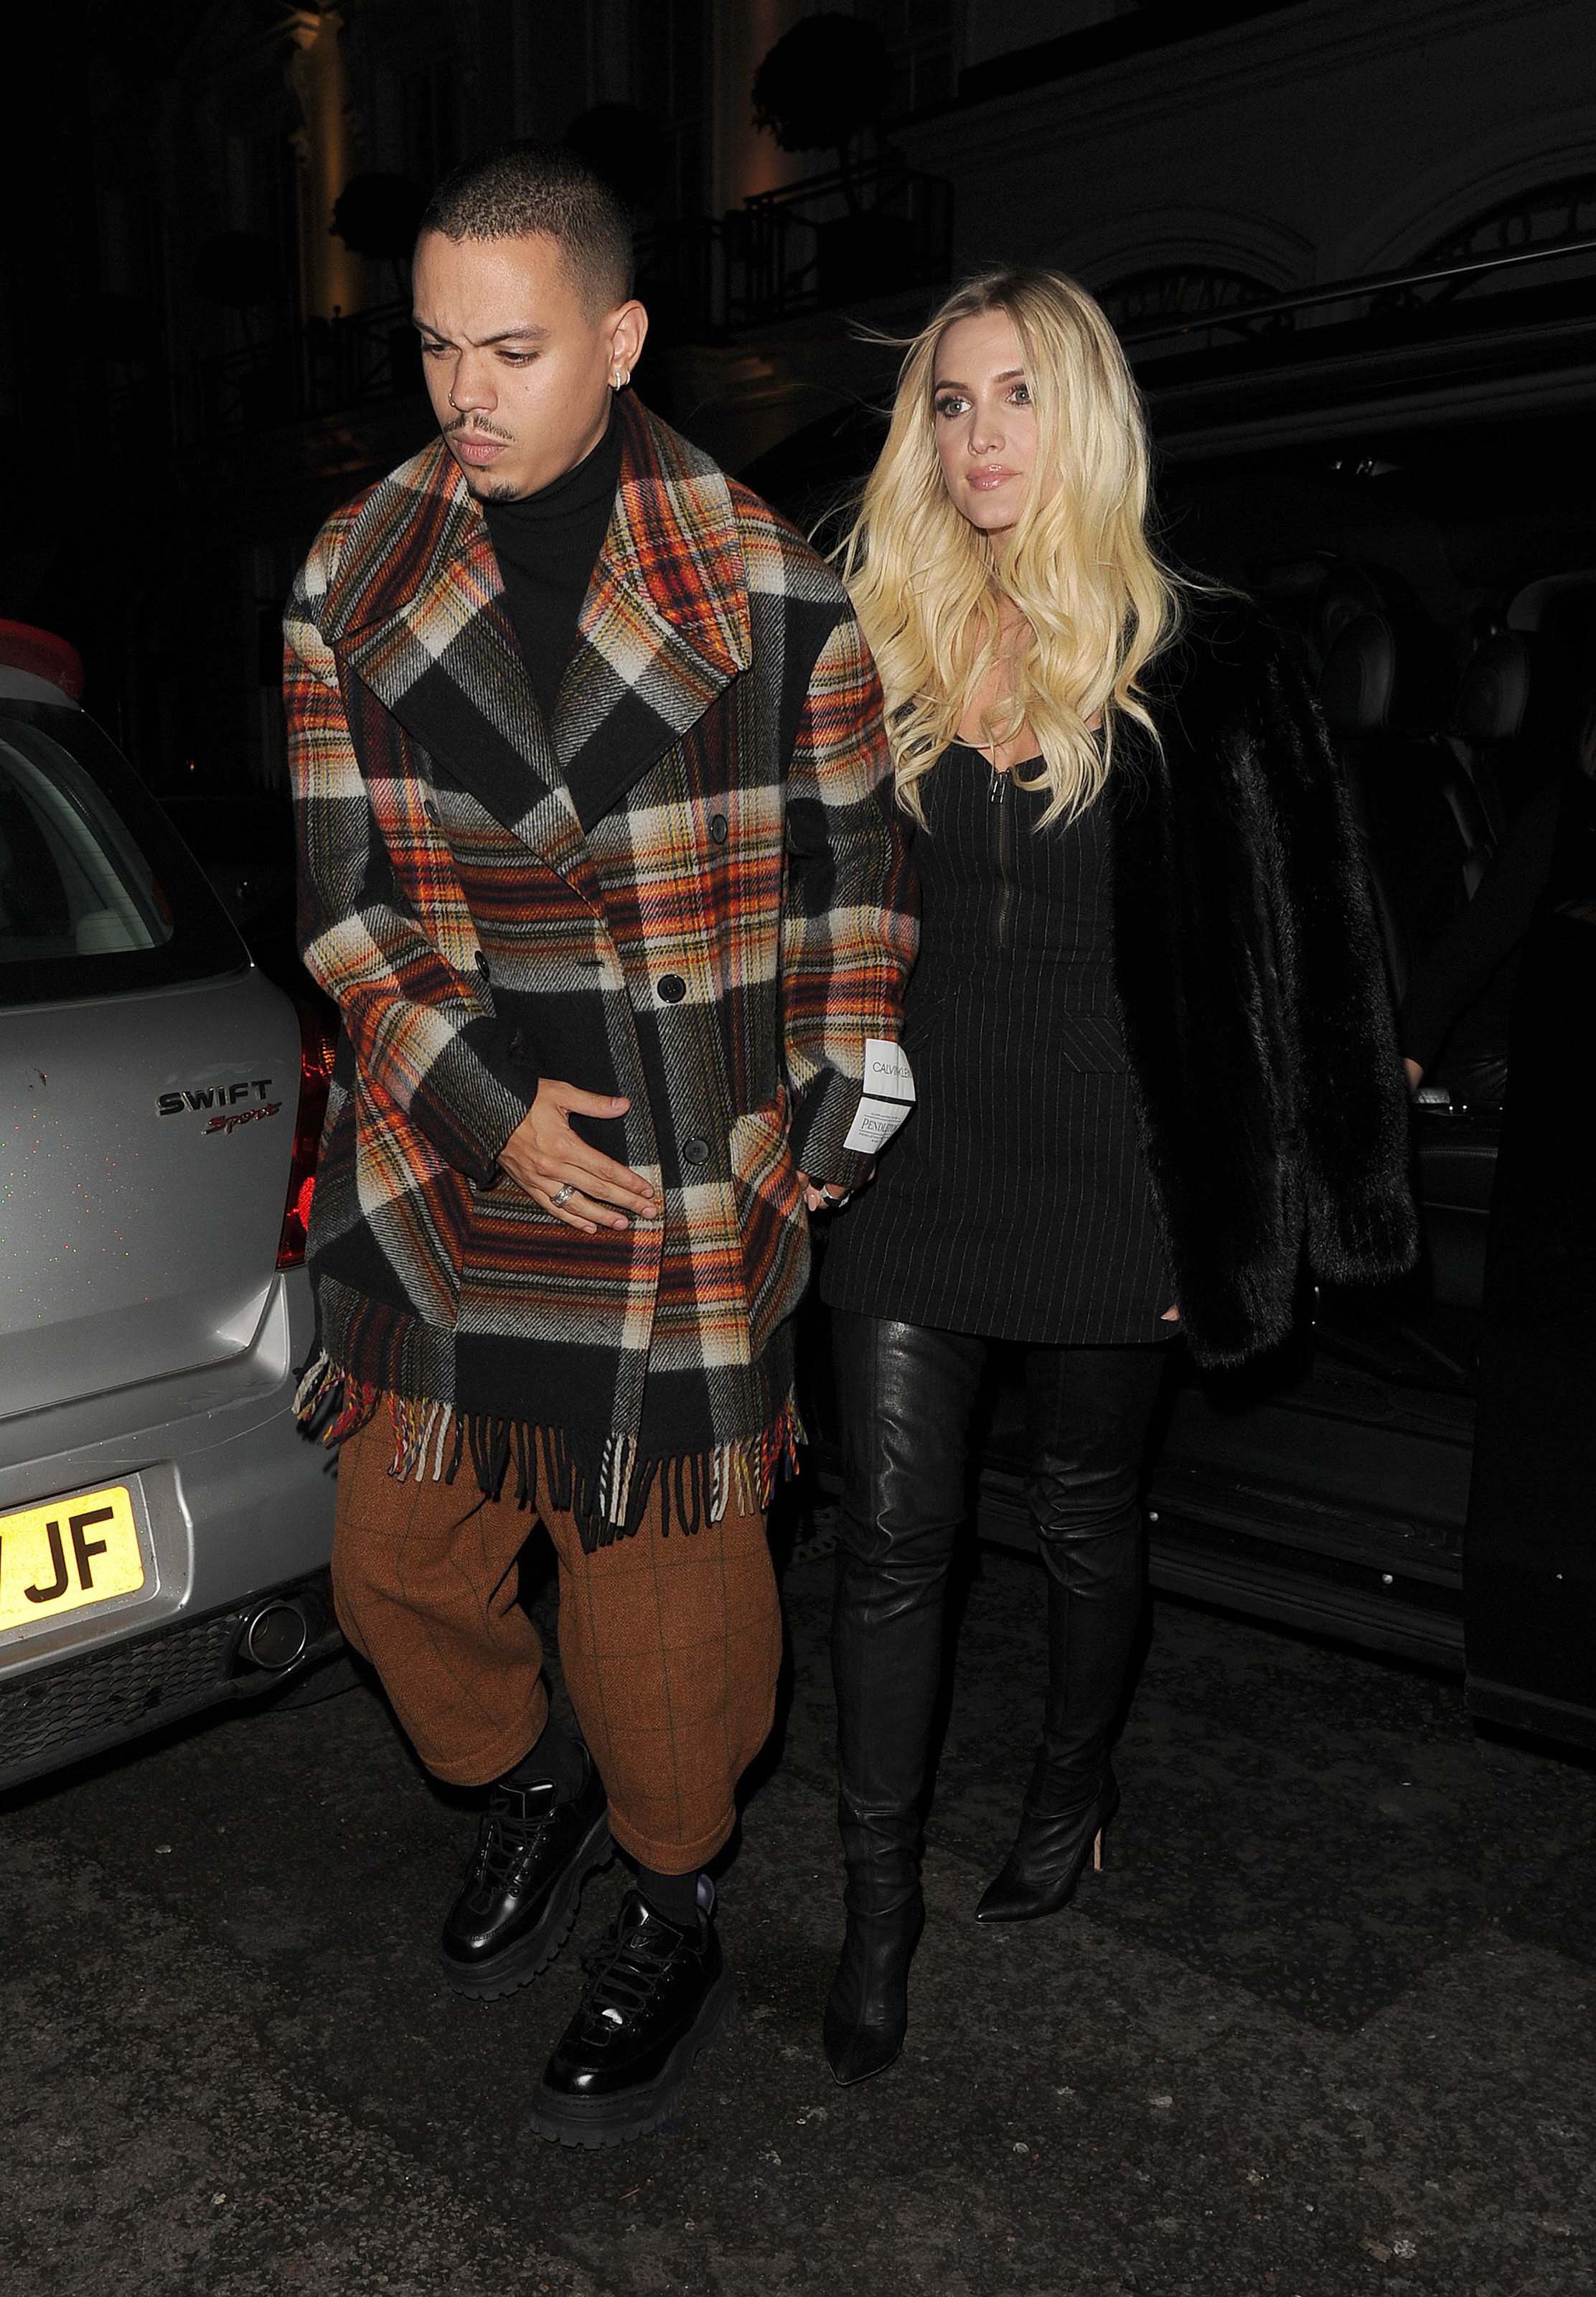 Ashlee Simpson out and about in London